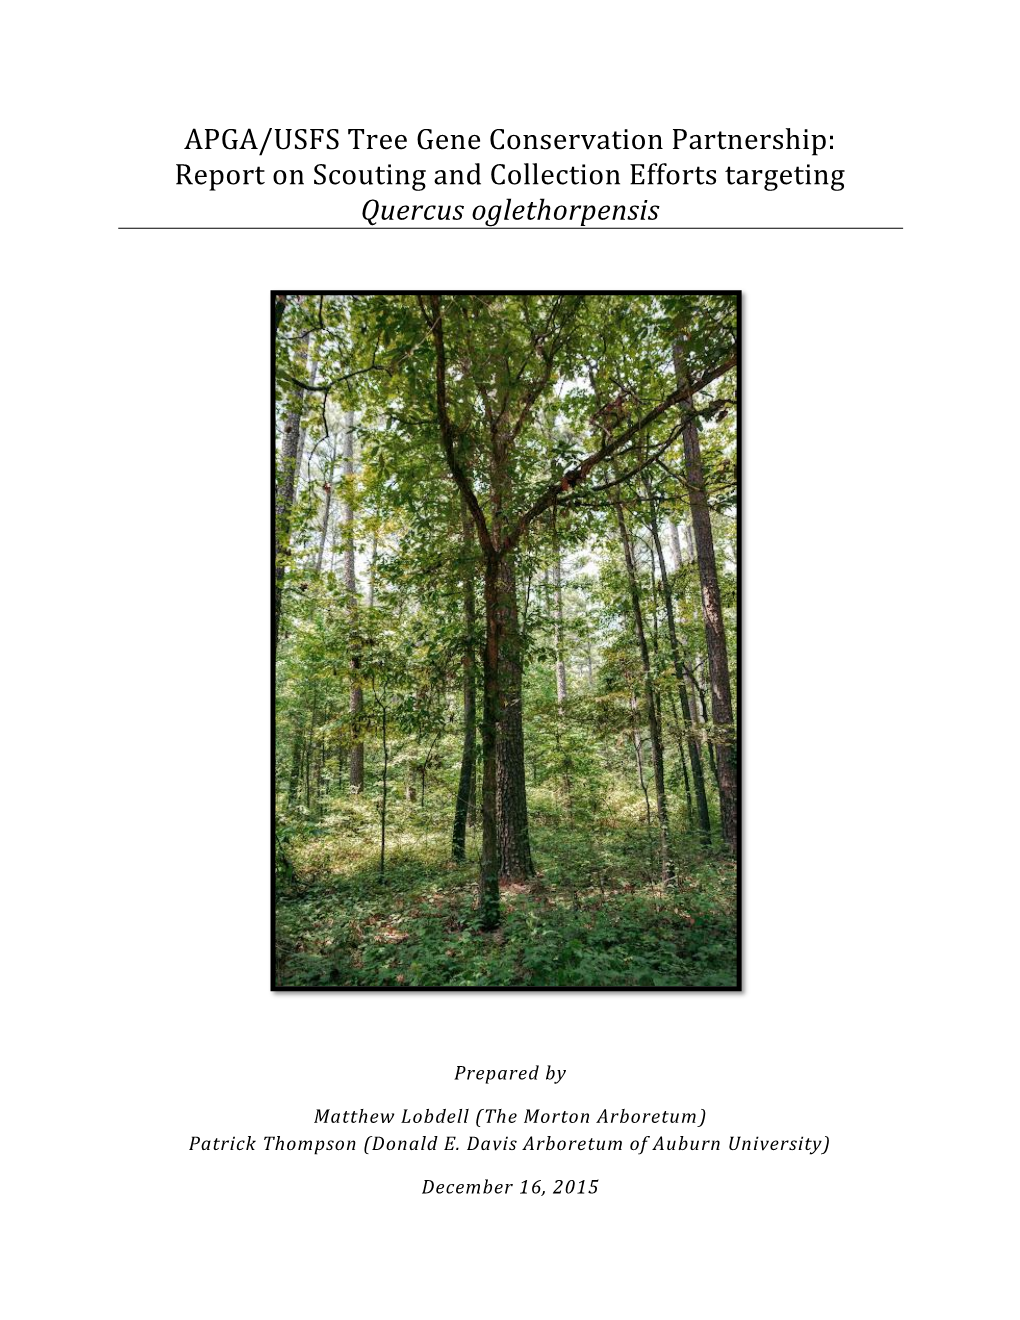 Report on Scouting and Collection Efforts Targeting Quercus Oglethorpensis